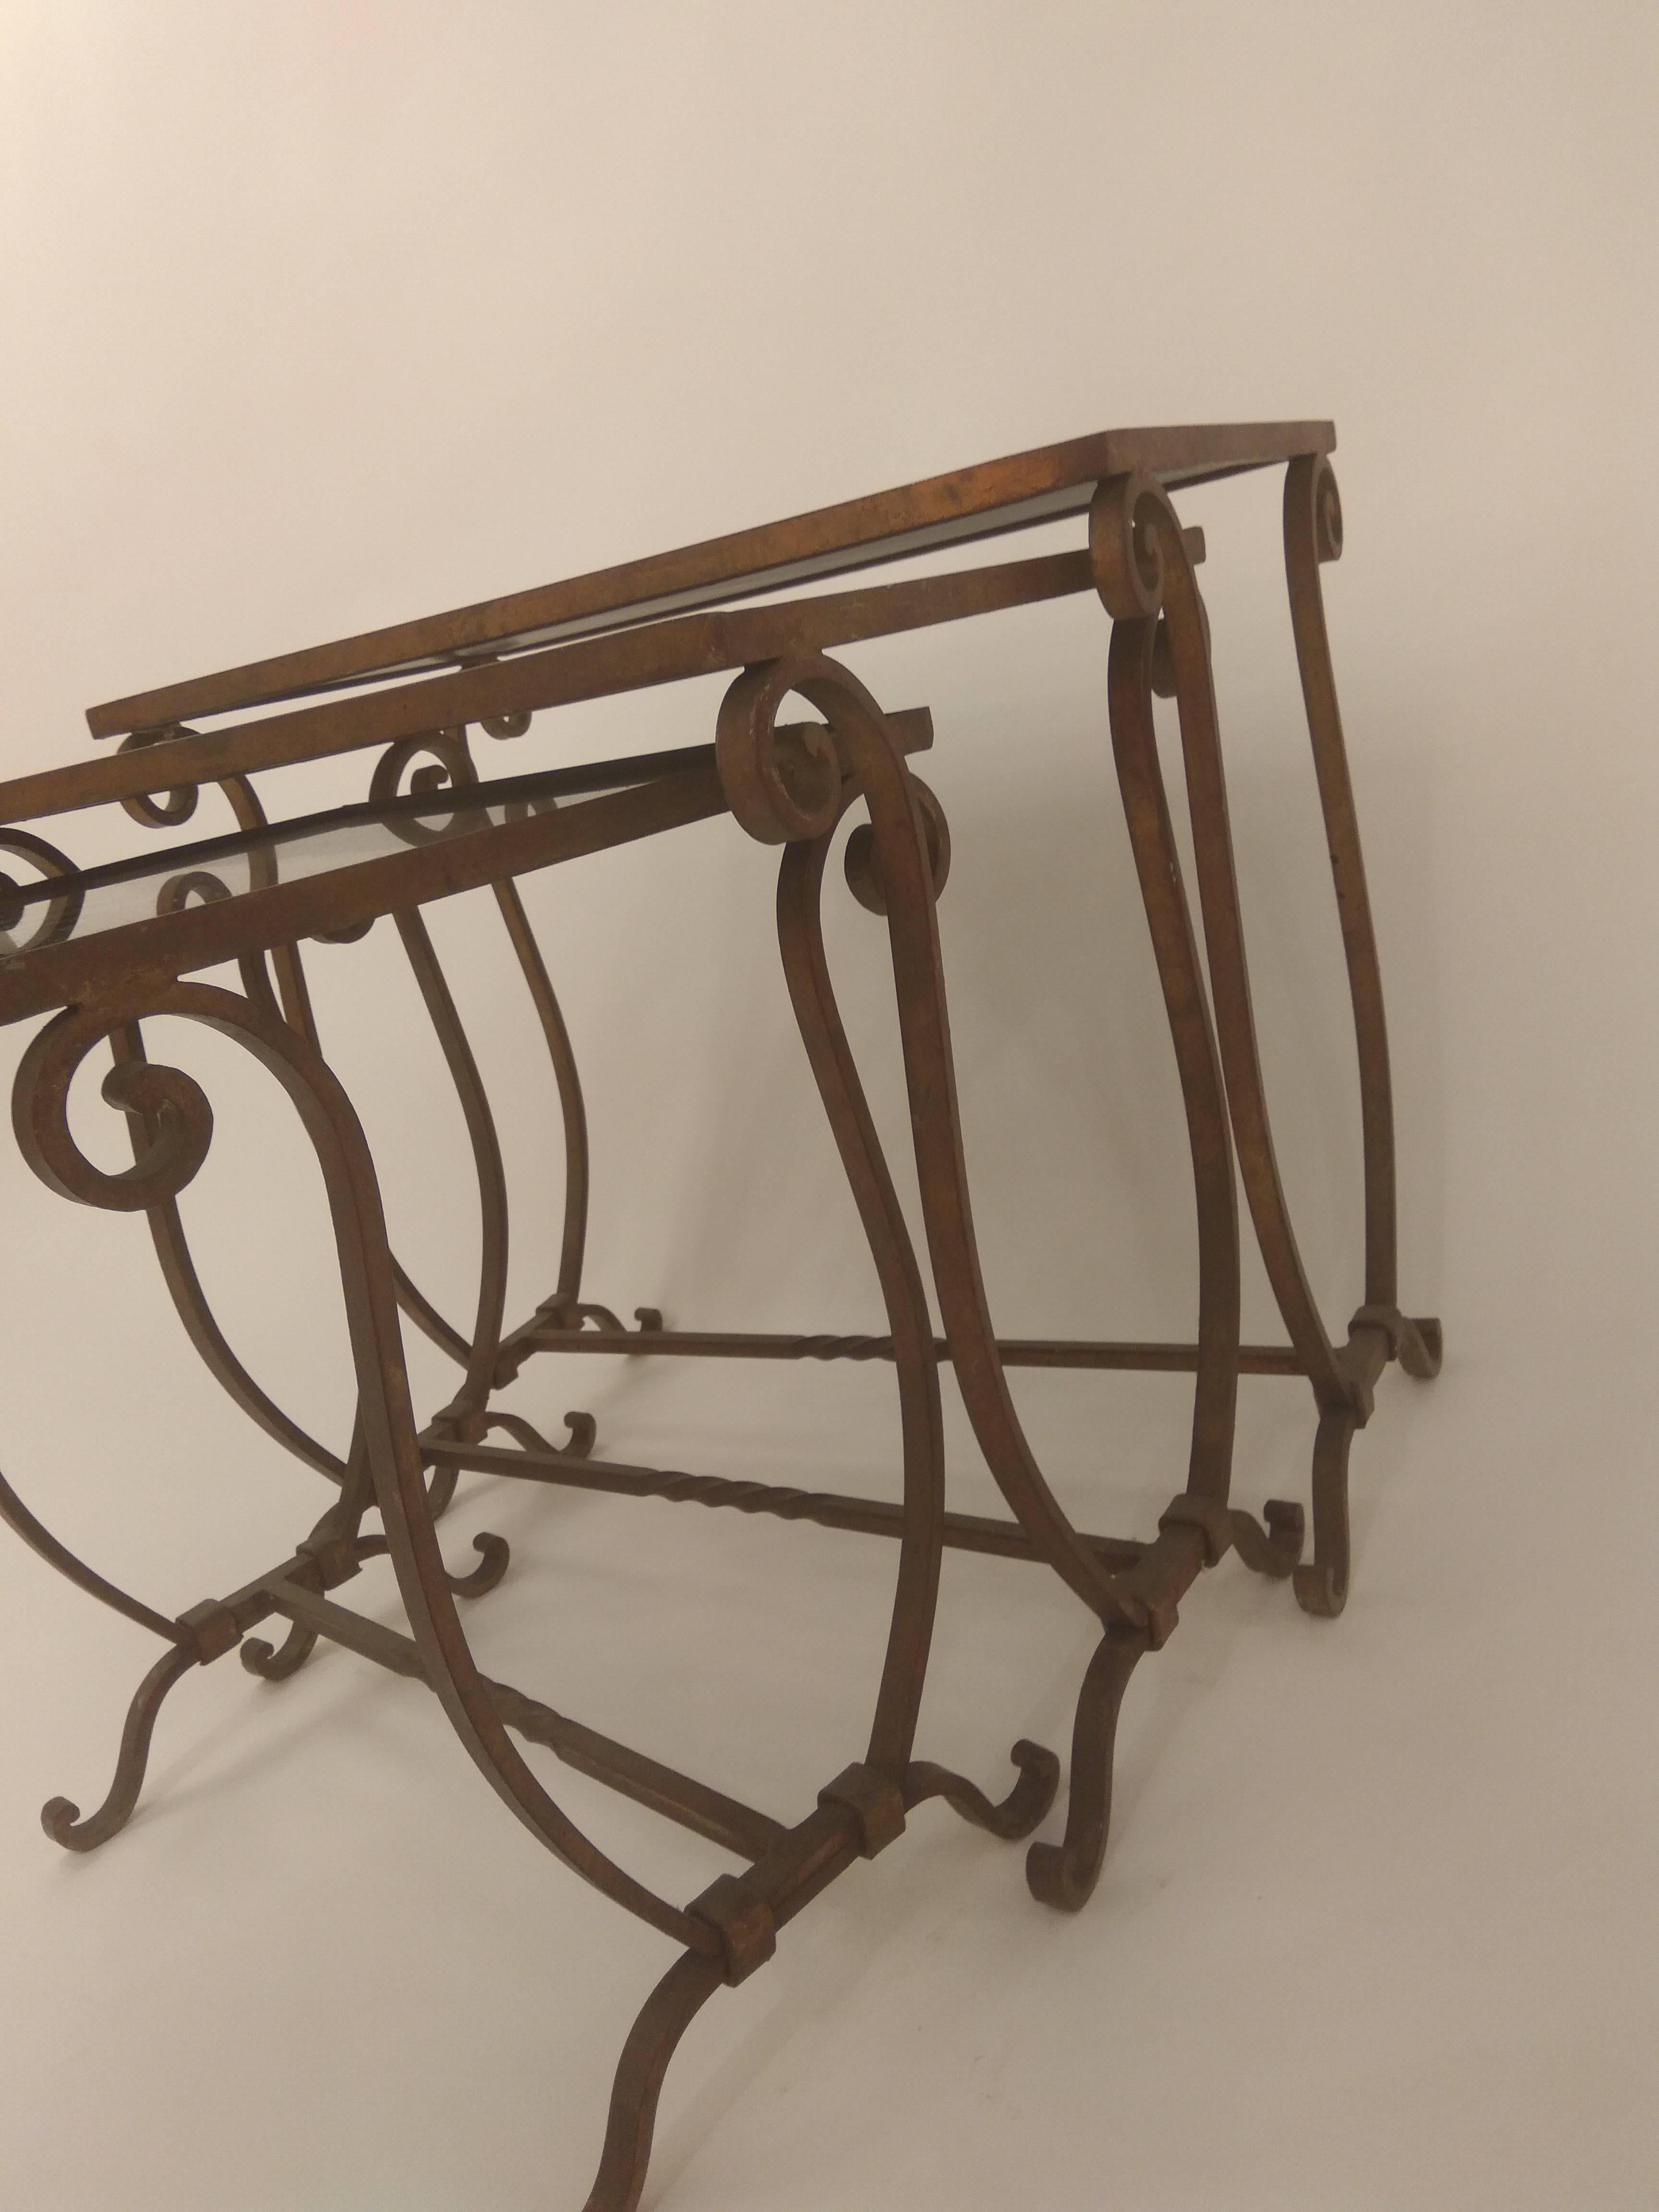 An Italian designed nest of three tables with base and legs in bronzed painted forged iron with black glass tops, 1950.